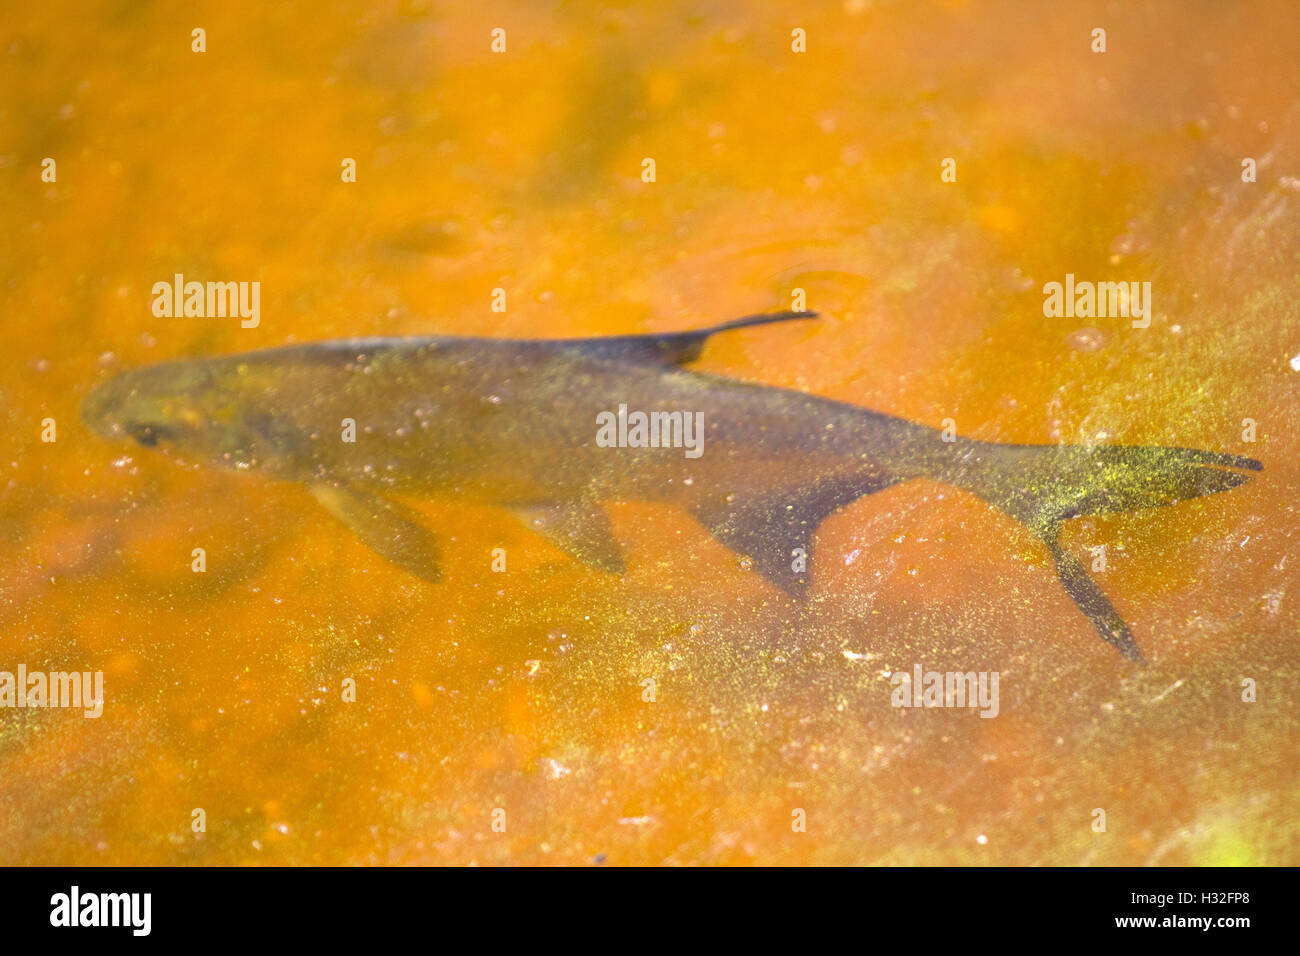 white-eye fish on shoal in the summer during a heat Stock Photo